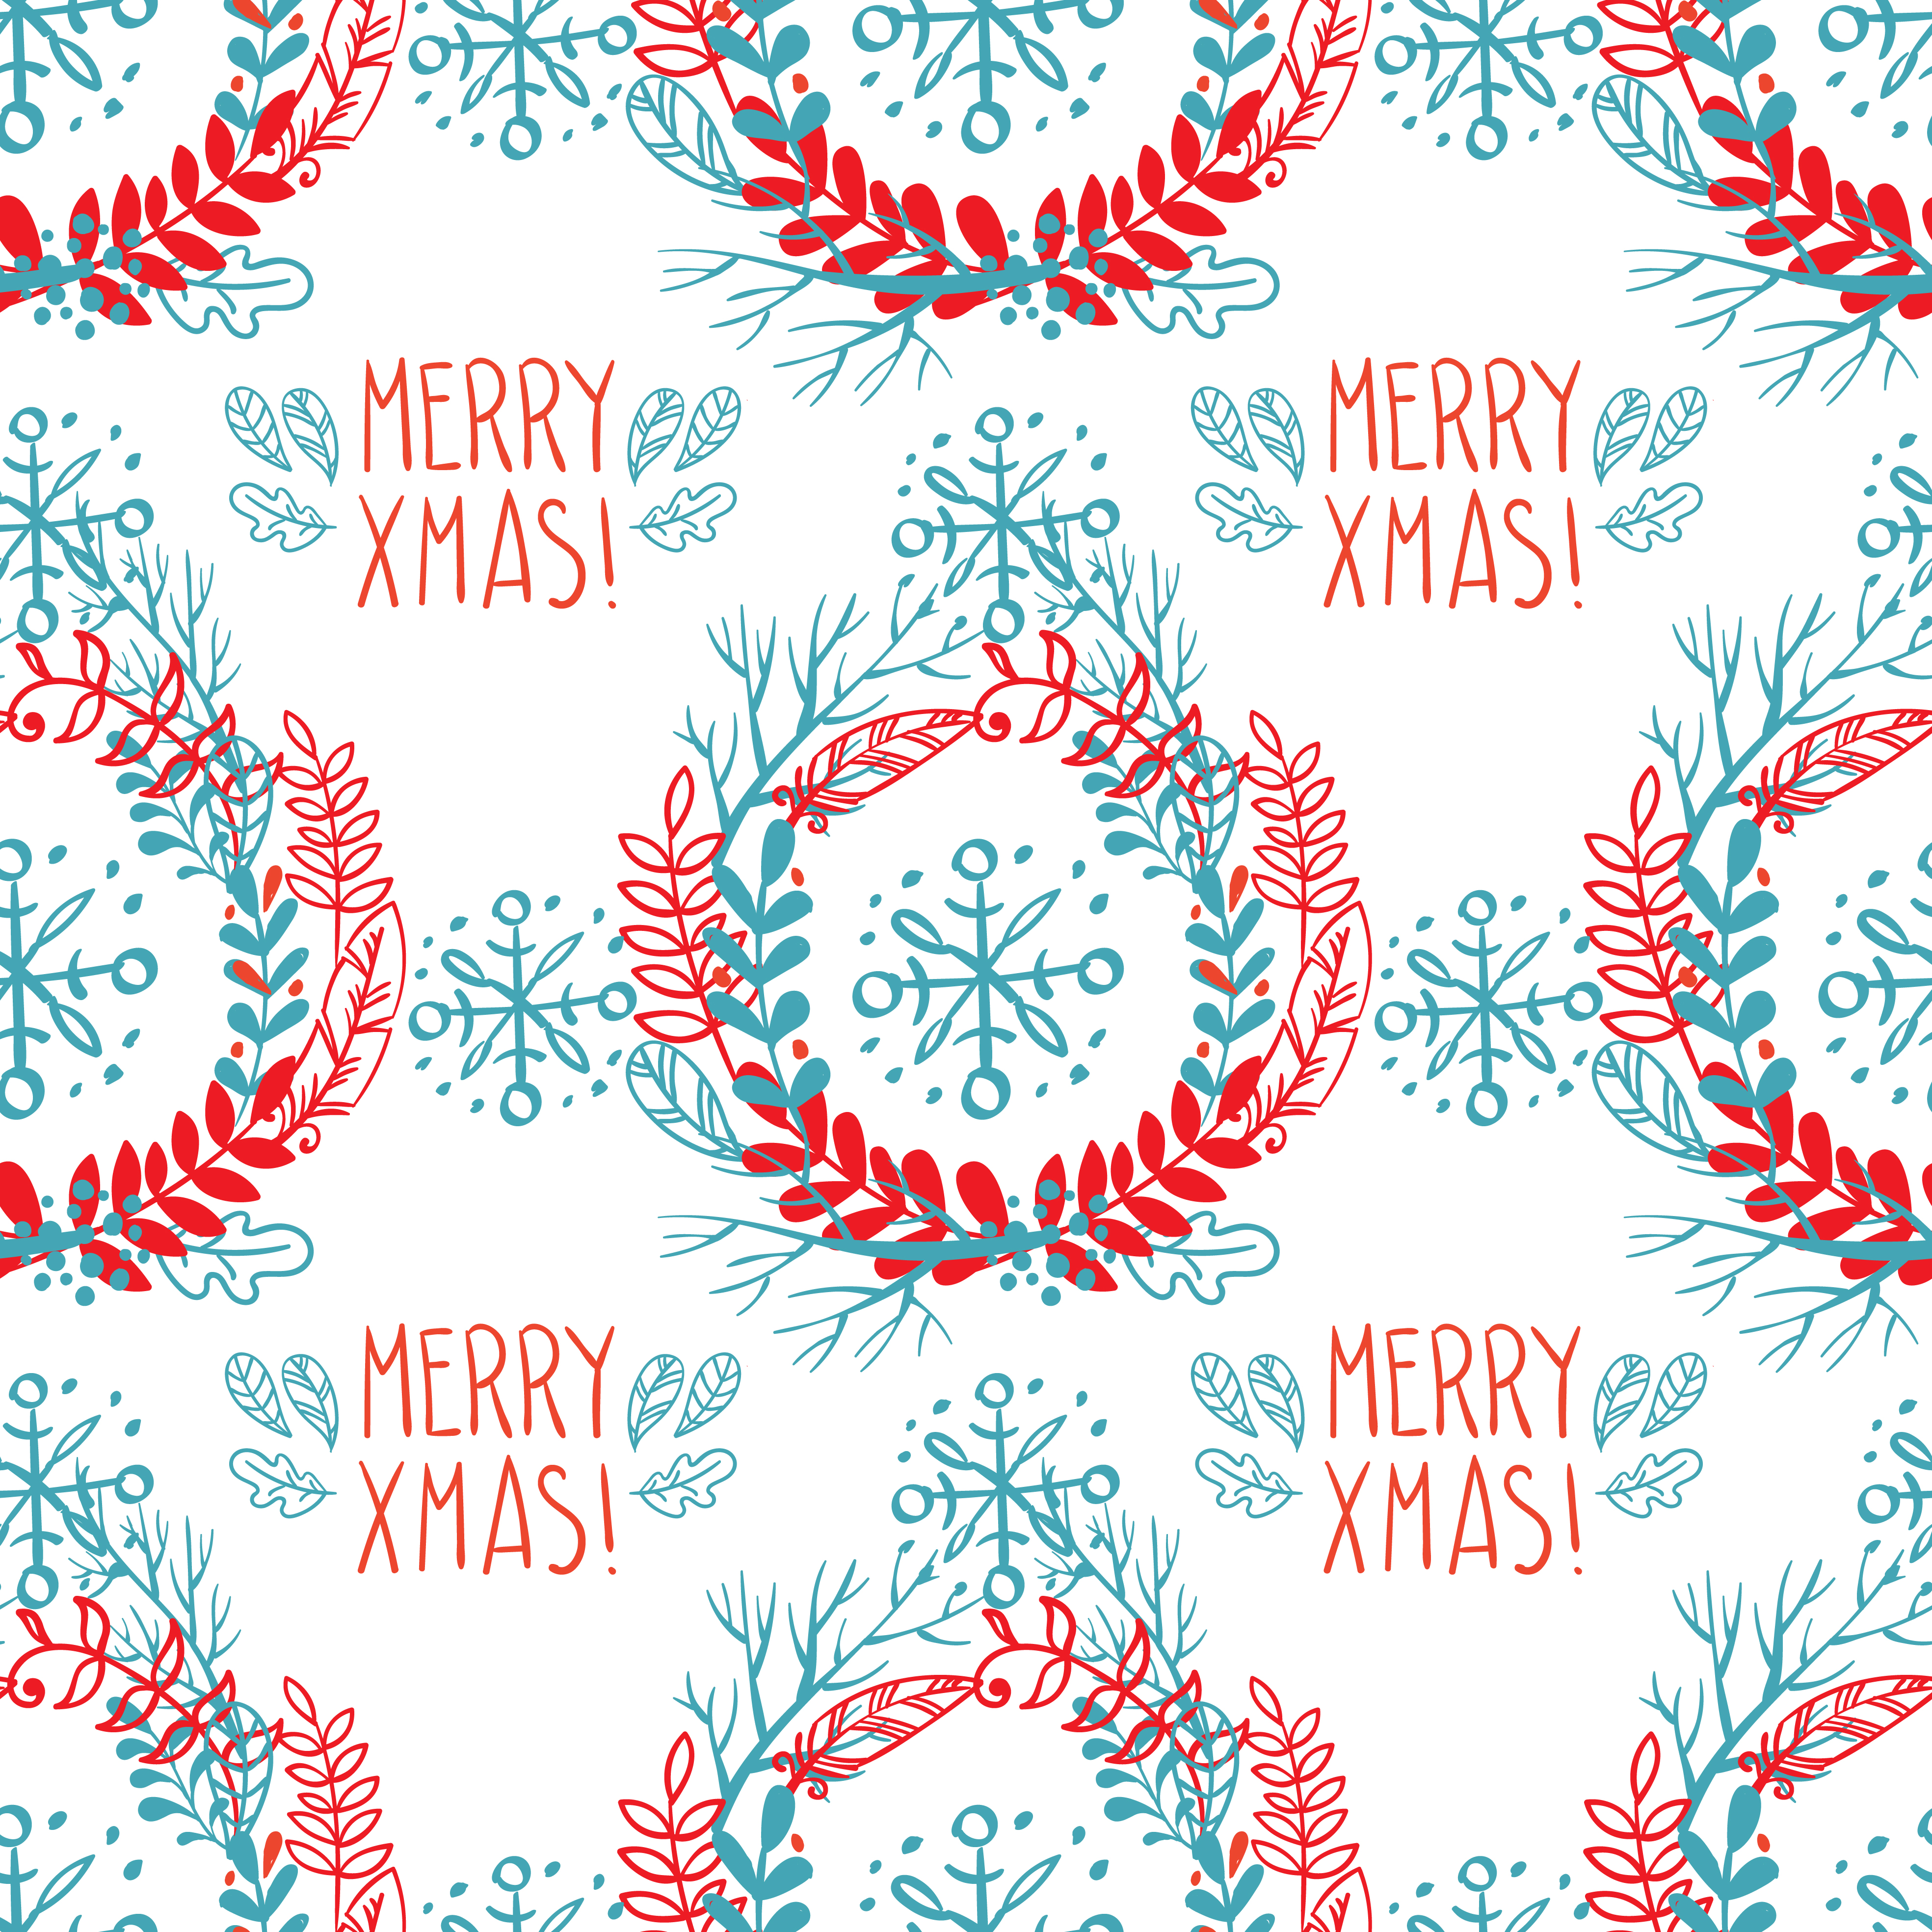 Download Seamless pattern of Christmas wreaths. - Download Free ...